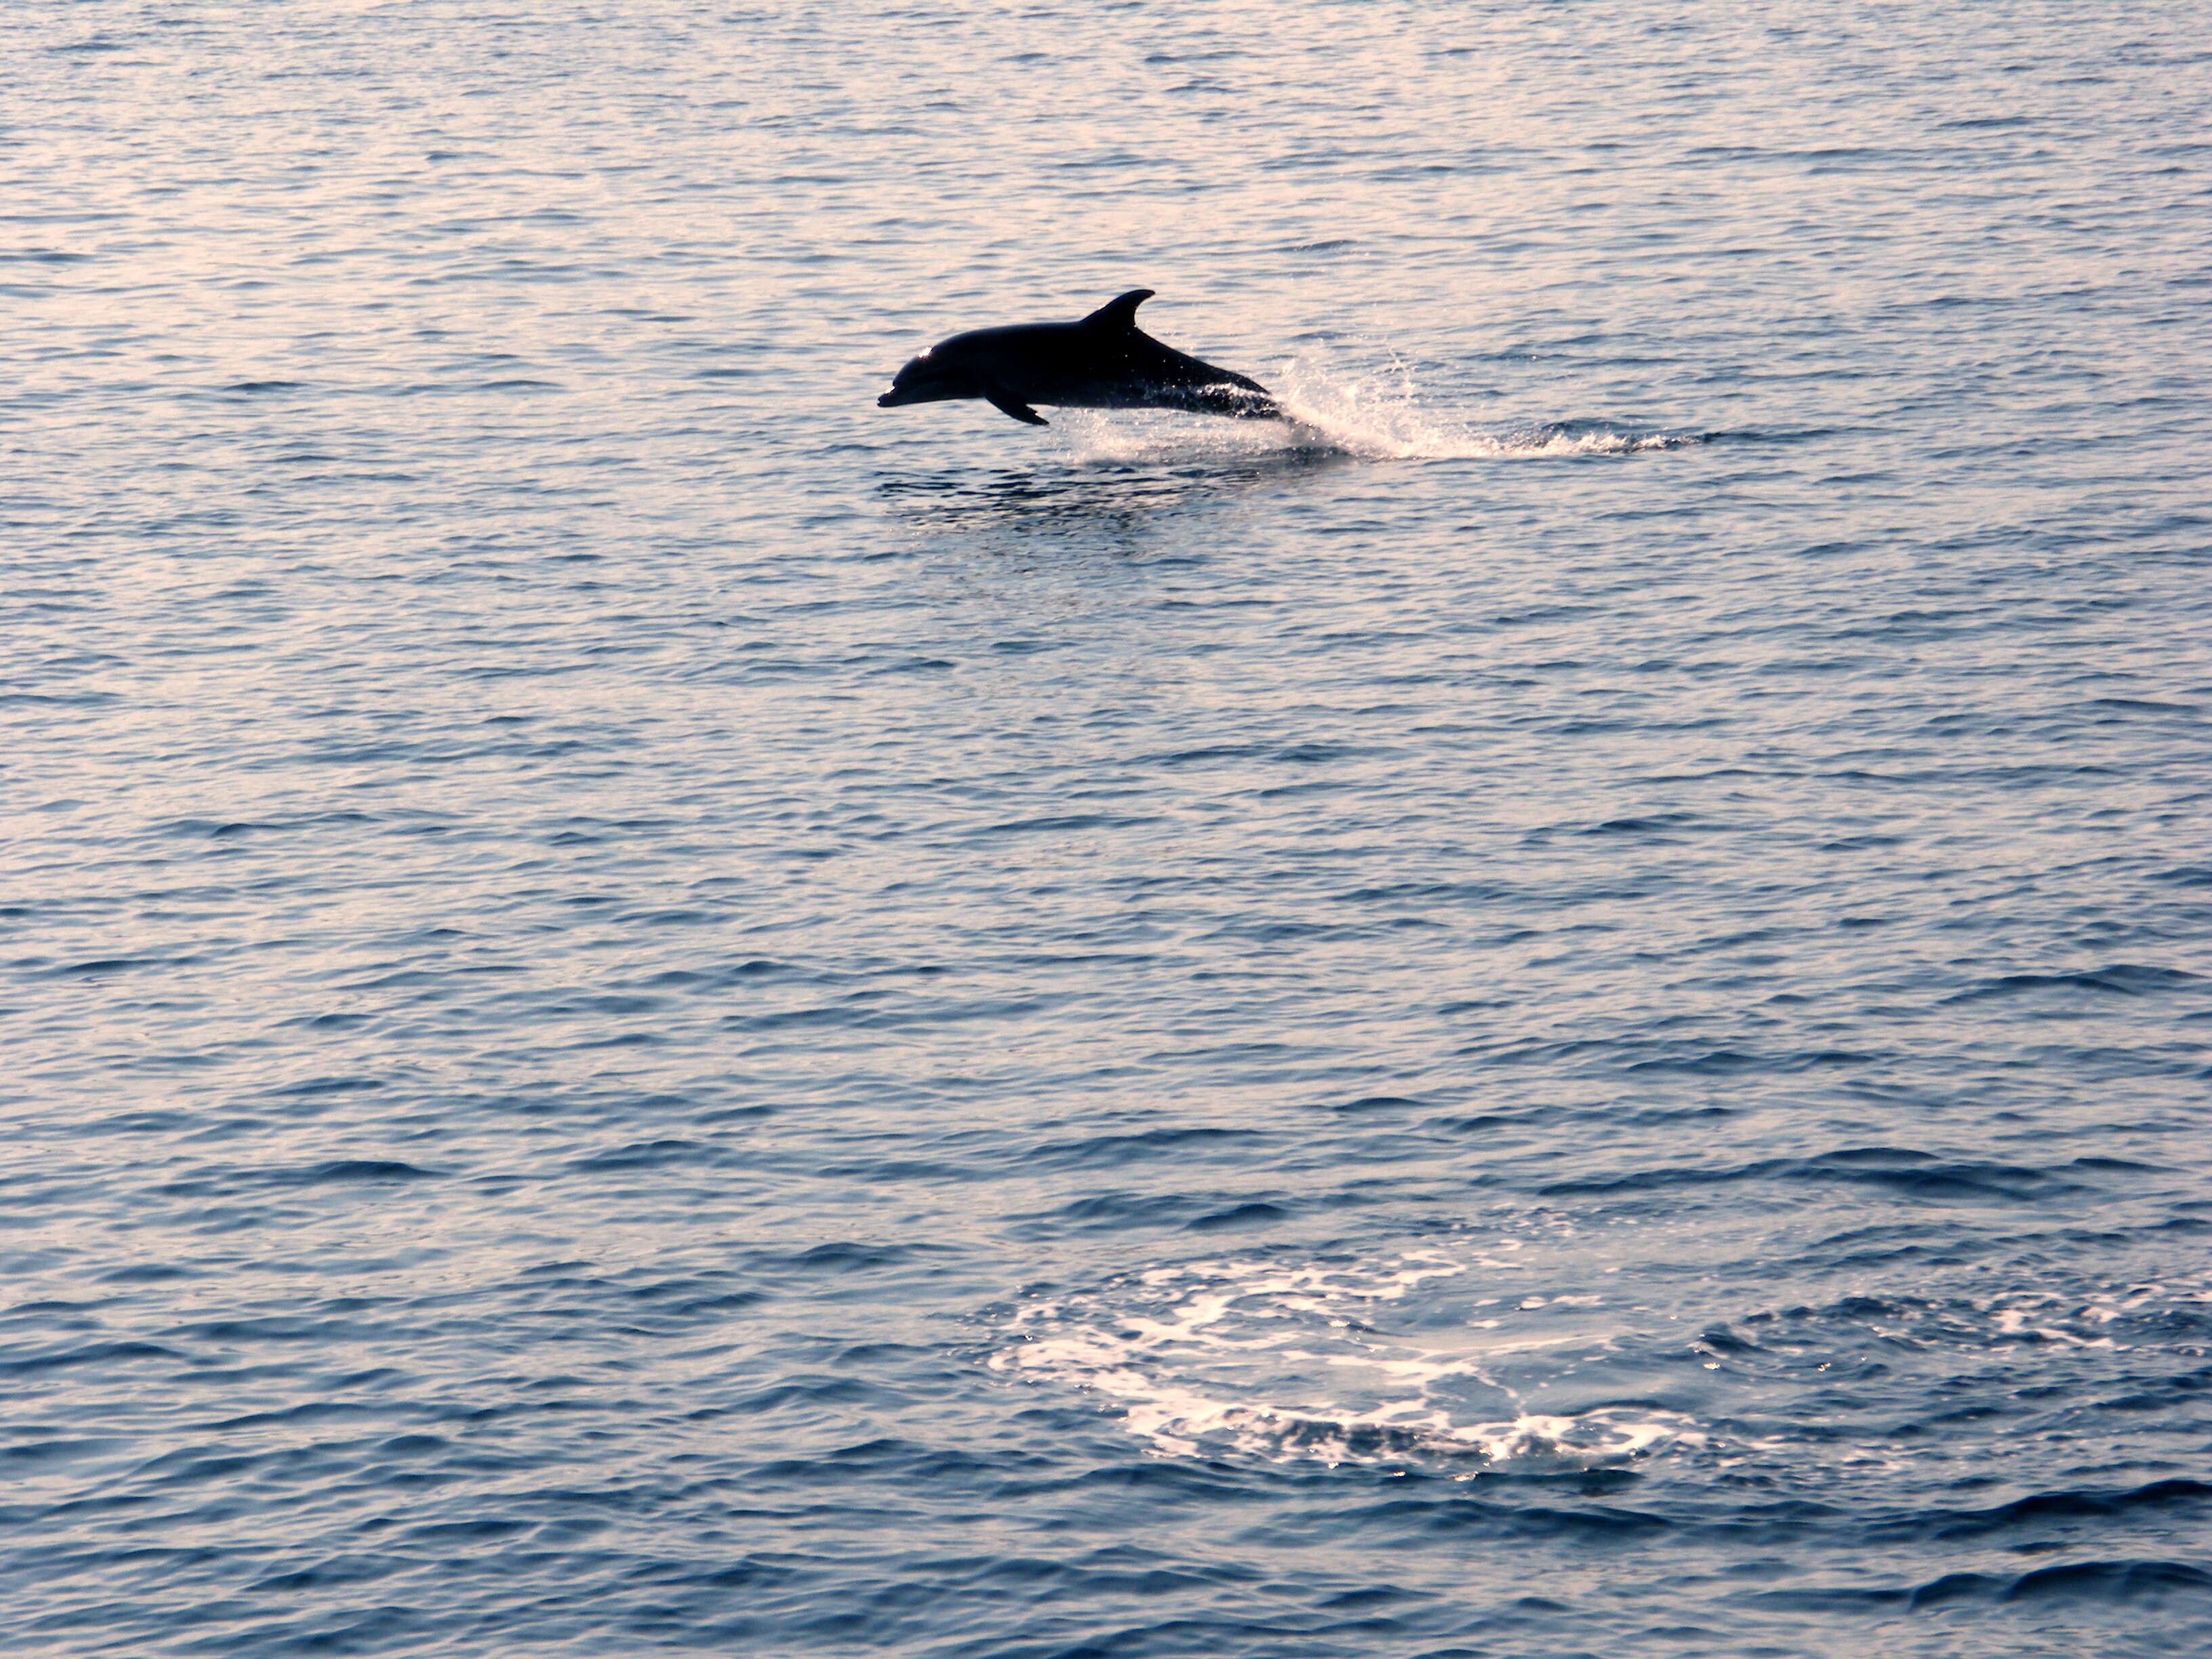 Image of common dolphins